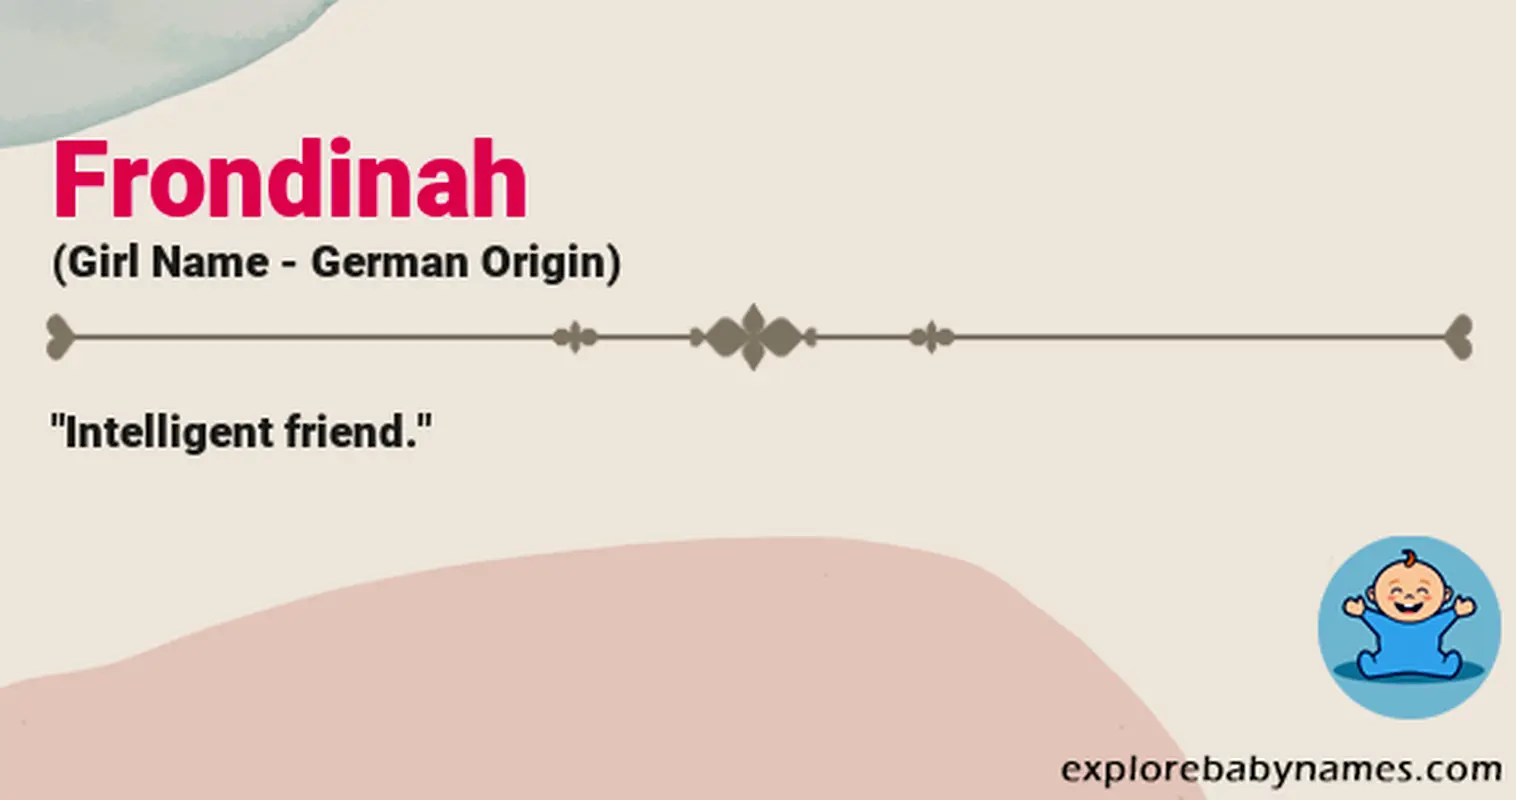 Meaning of Frondinah